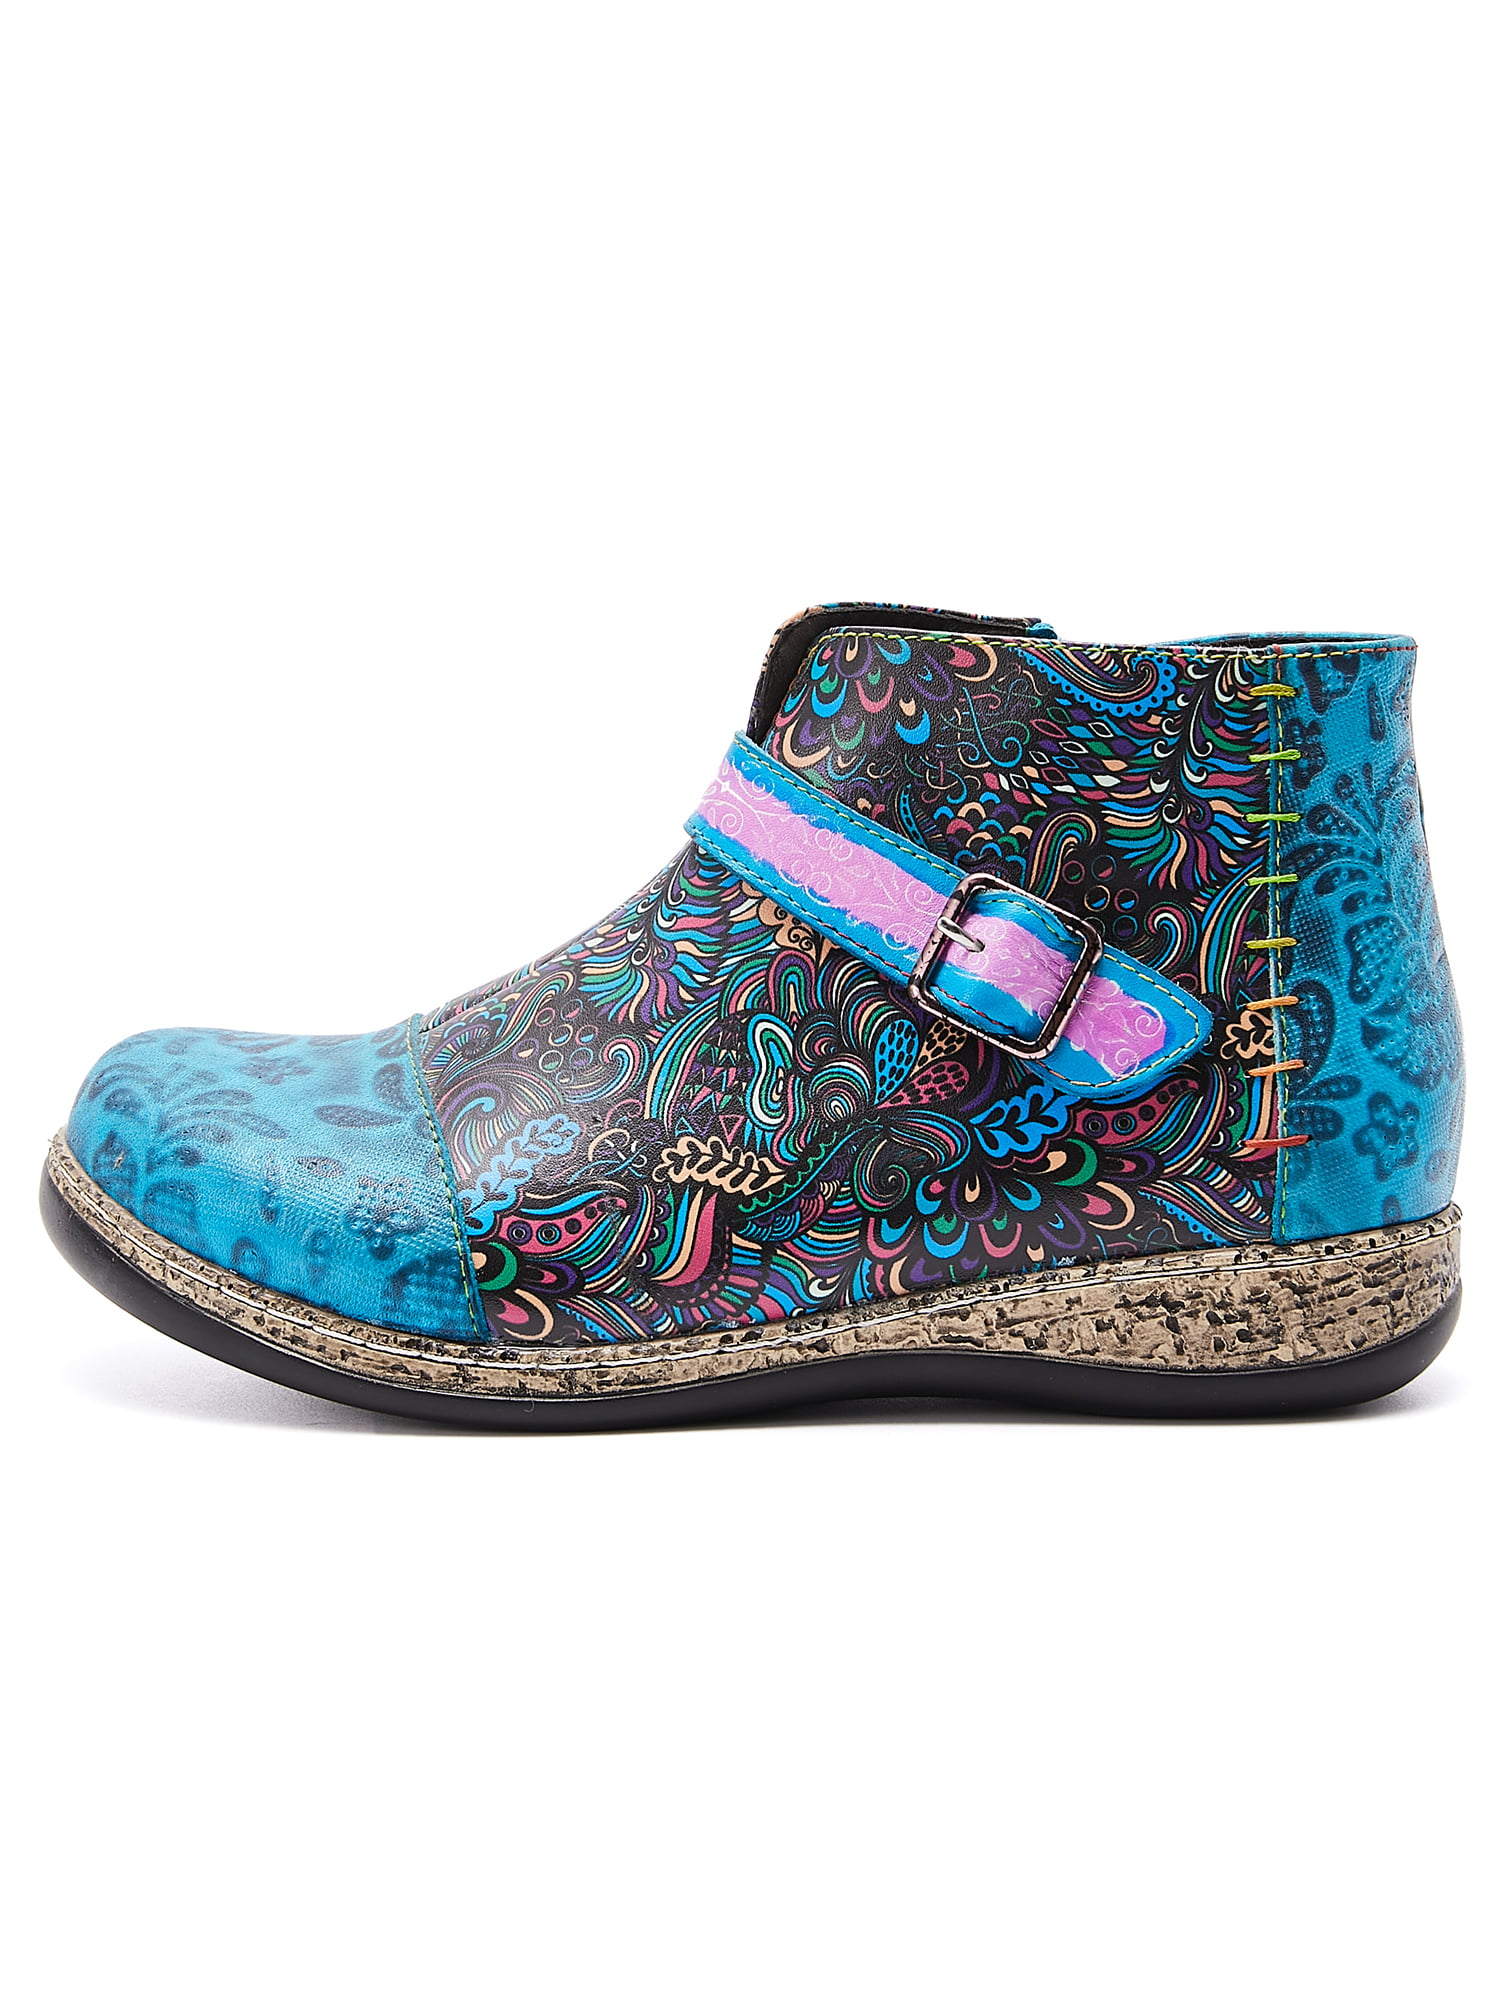 US9-3 Big Kid Girls Children Ankle Boots Embroidery Zipper Outdoor Casual Shoes 